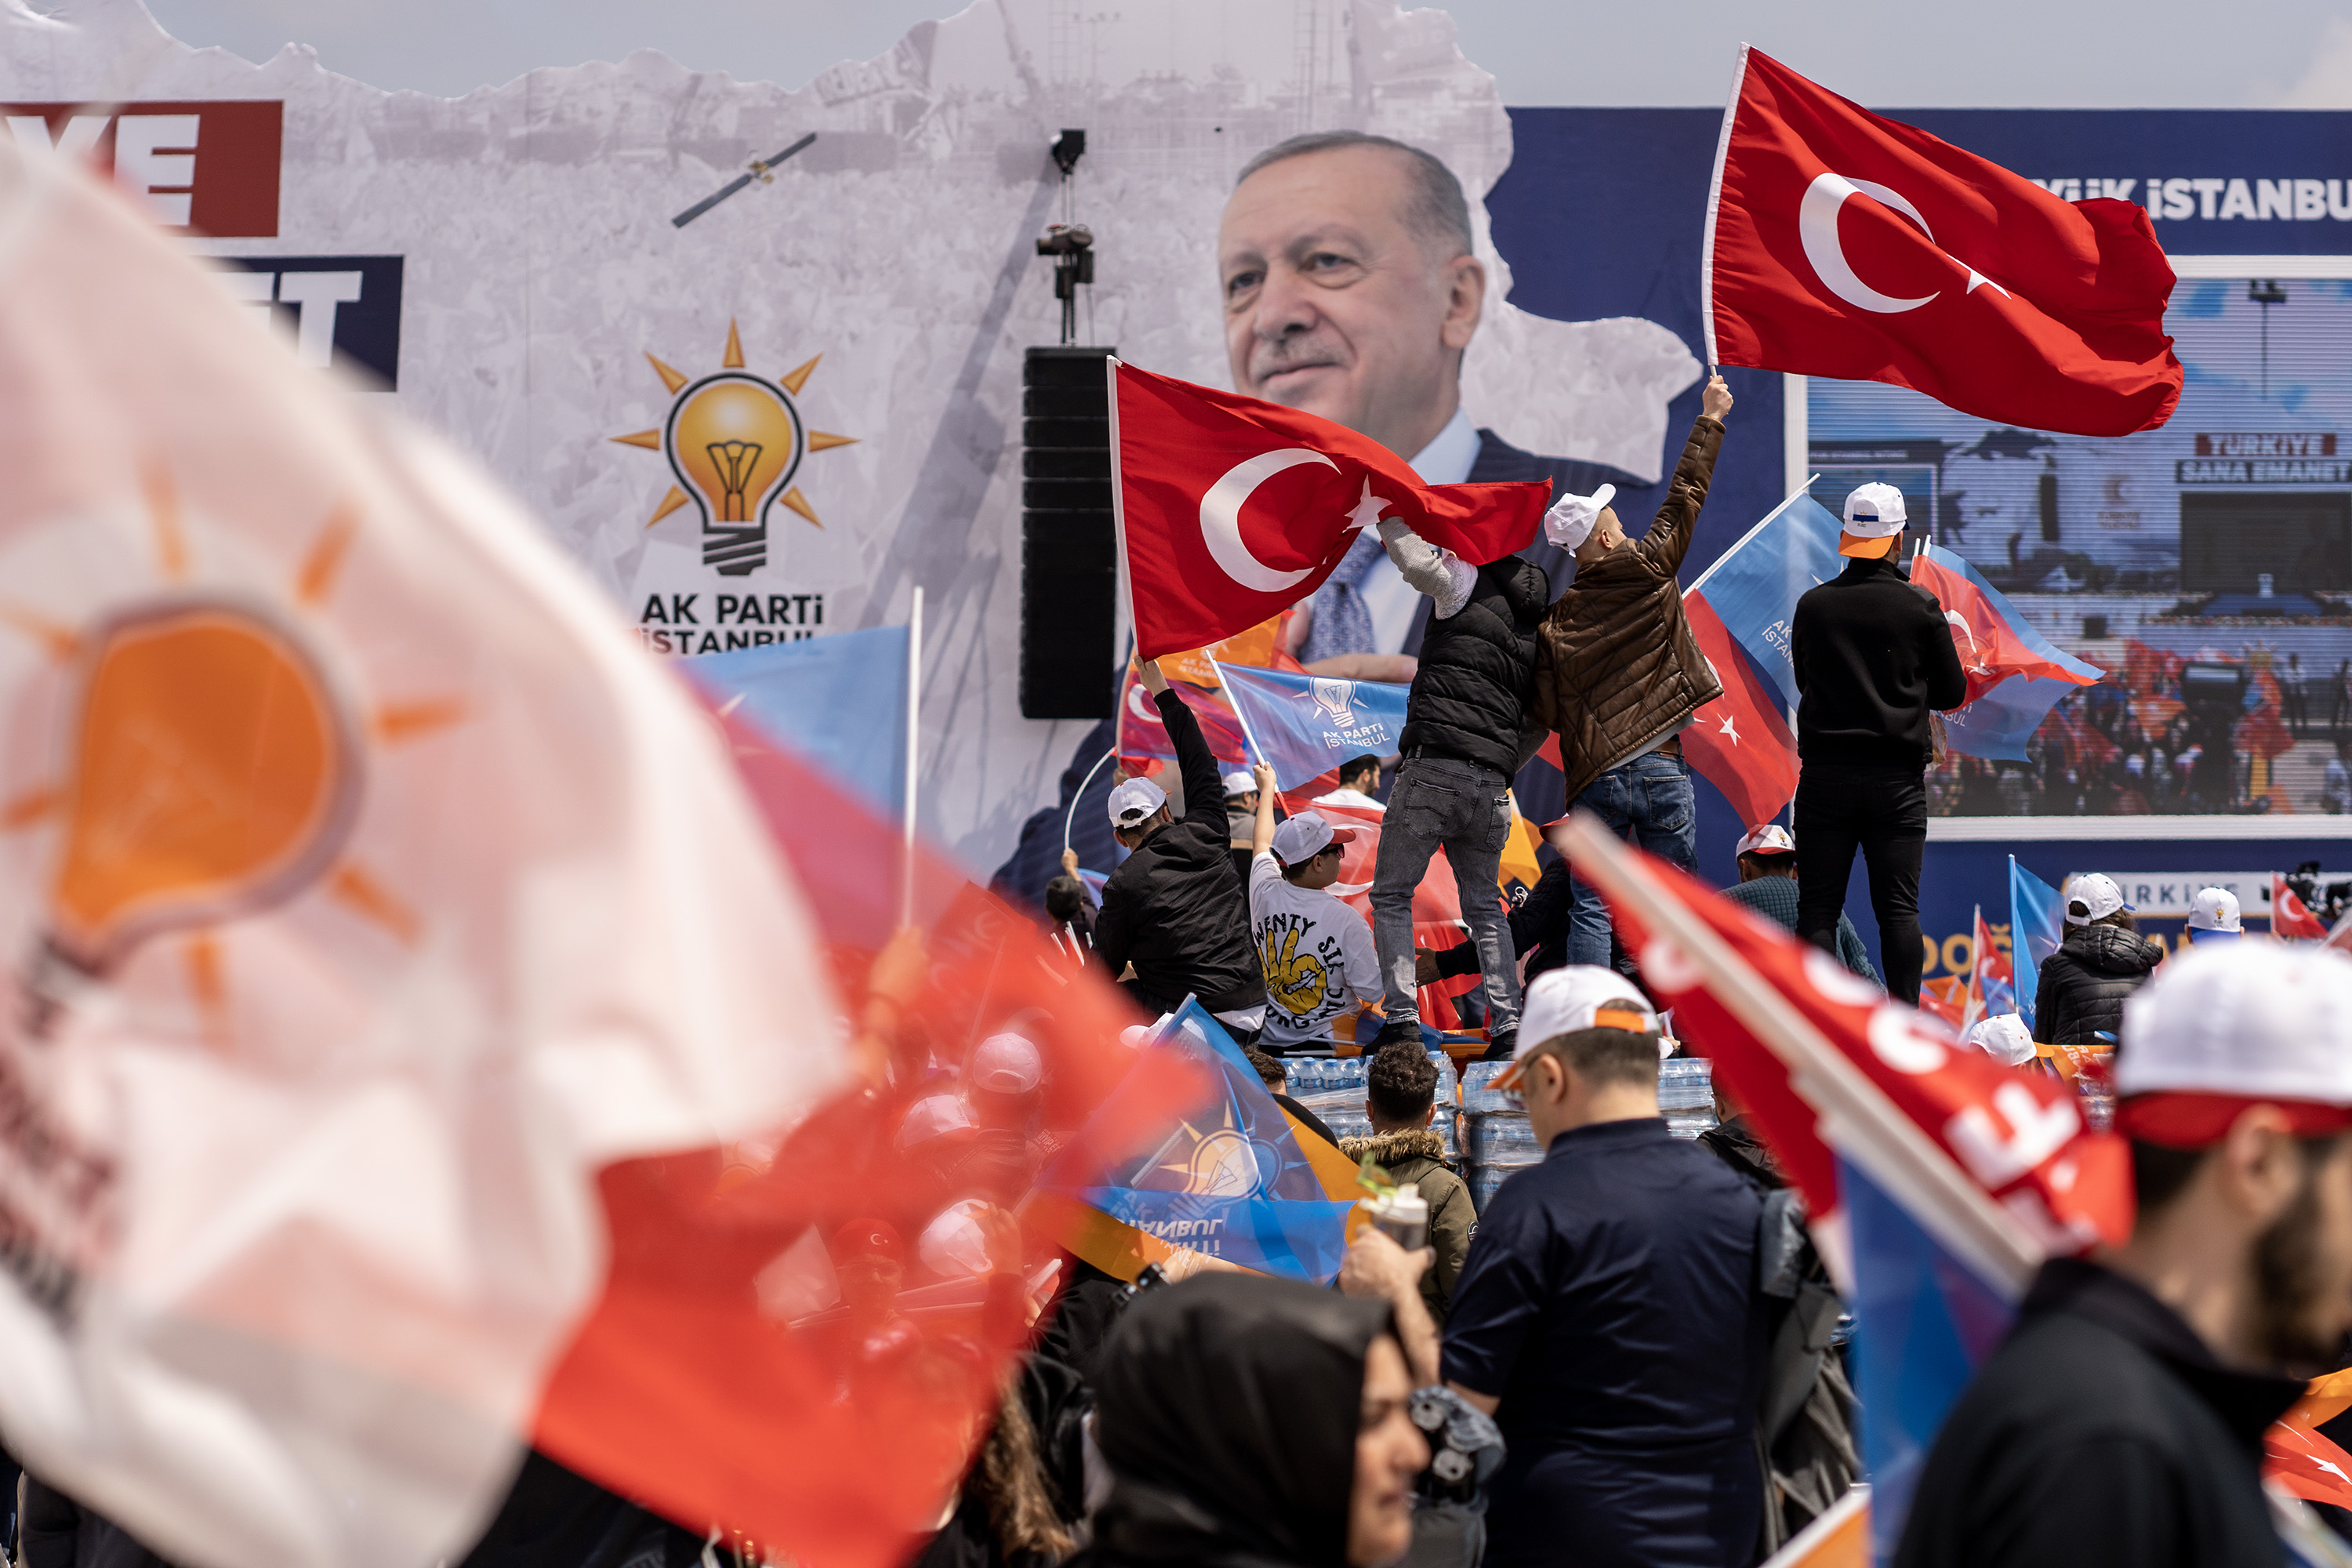 Supporters of Turkey’s President Recep Tayyip Erdogan during an election campaign rally in Istanbul, on May 7.